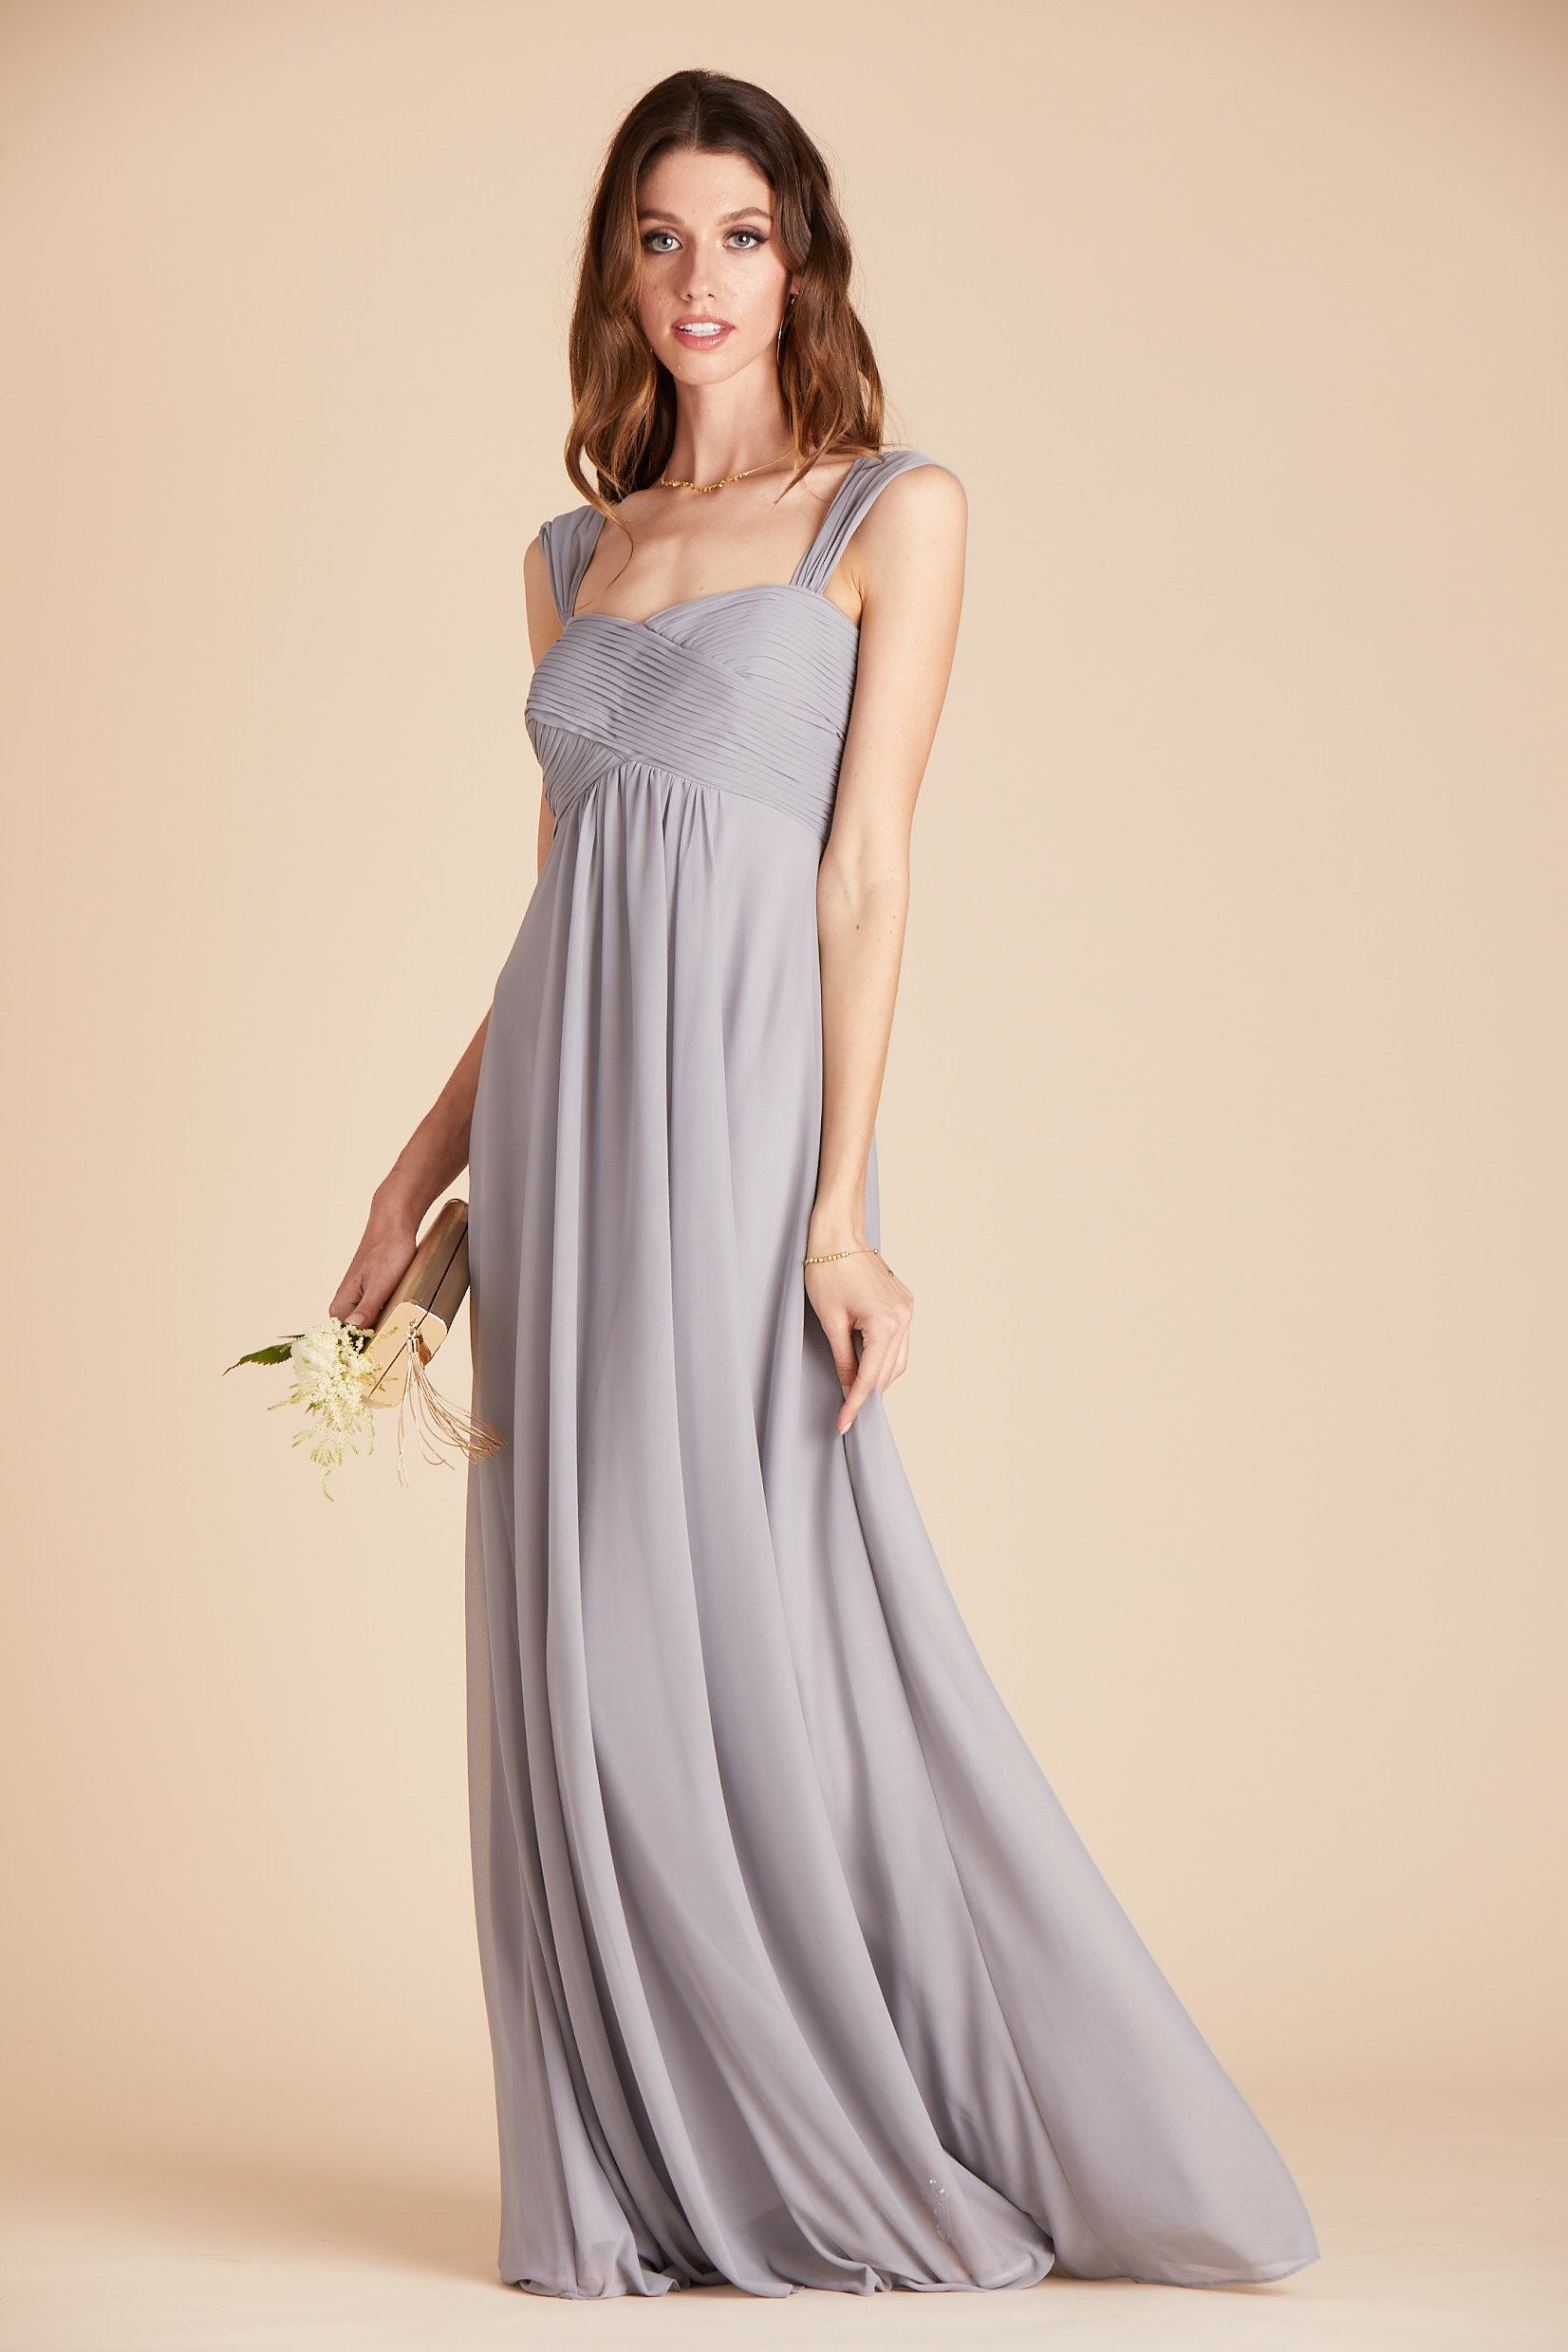 Maria convertible bridesmaids dress in silver mesh by Birdy Grey, front view